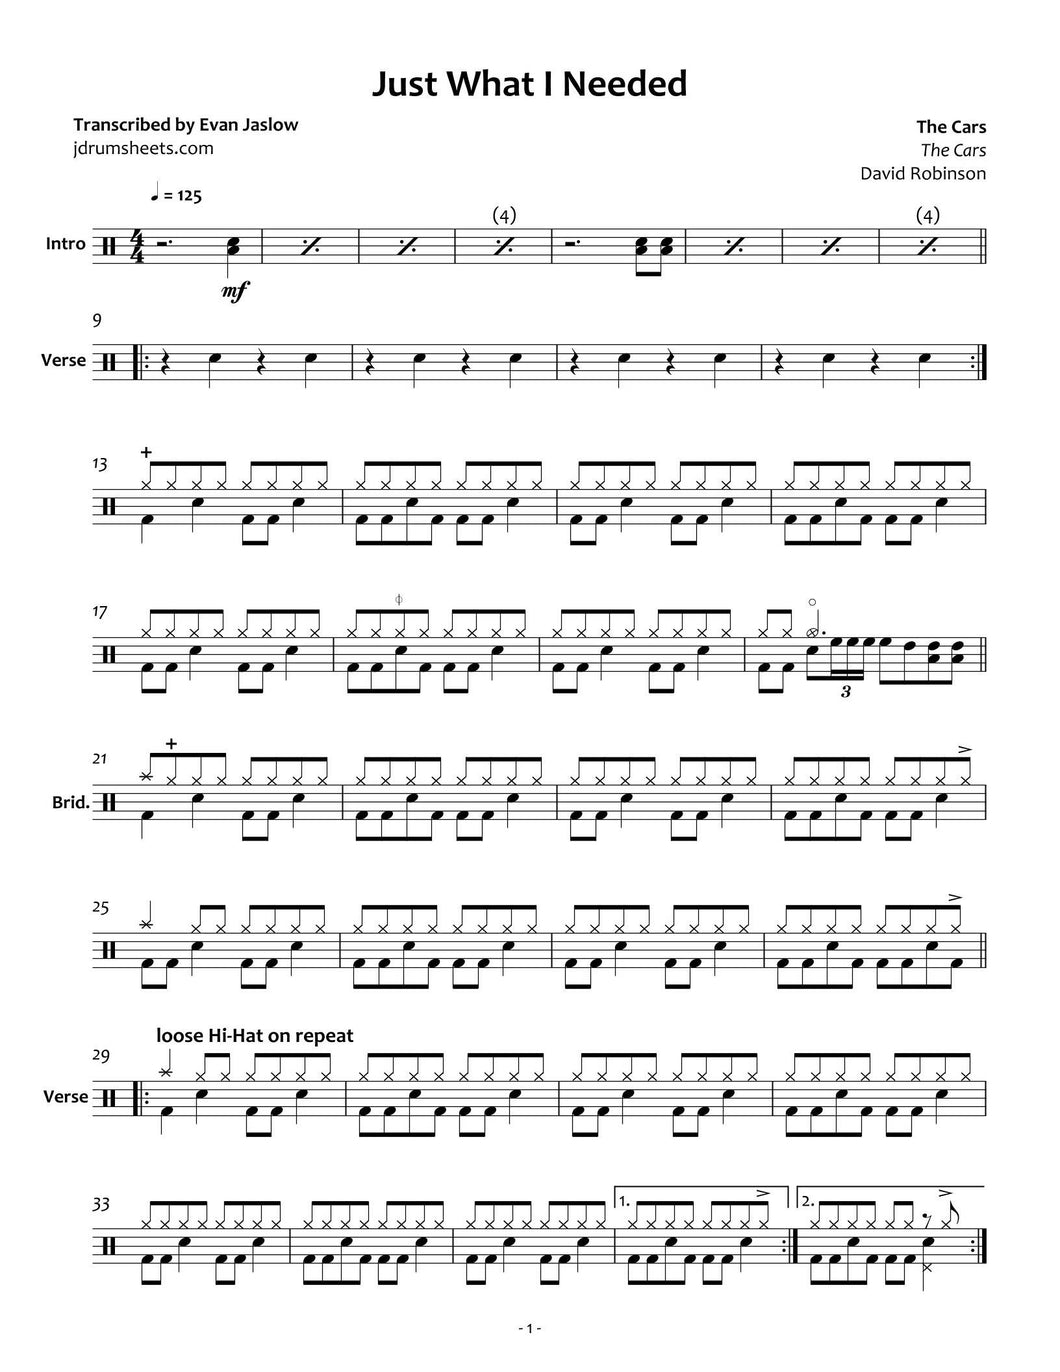 Just What I Needed - The Cars - Full Drum Transcription / Drum Sheet Music - Jaslow Drum Sheets